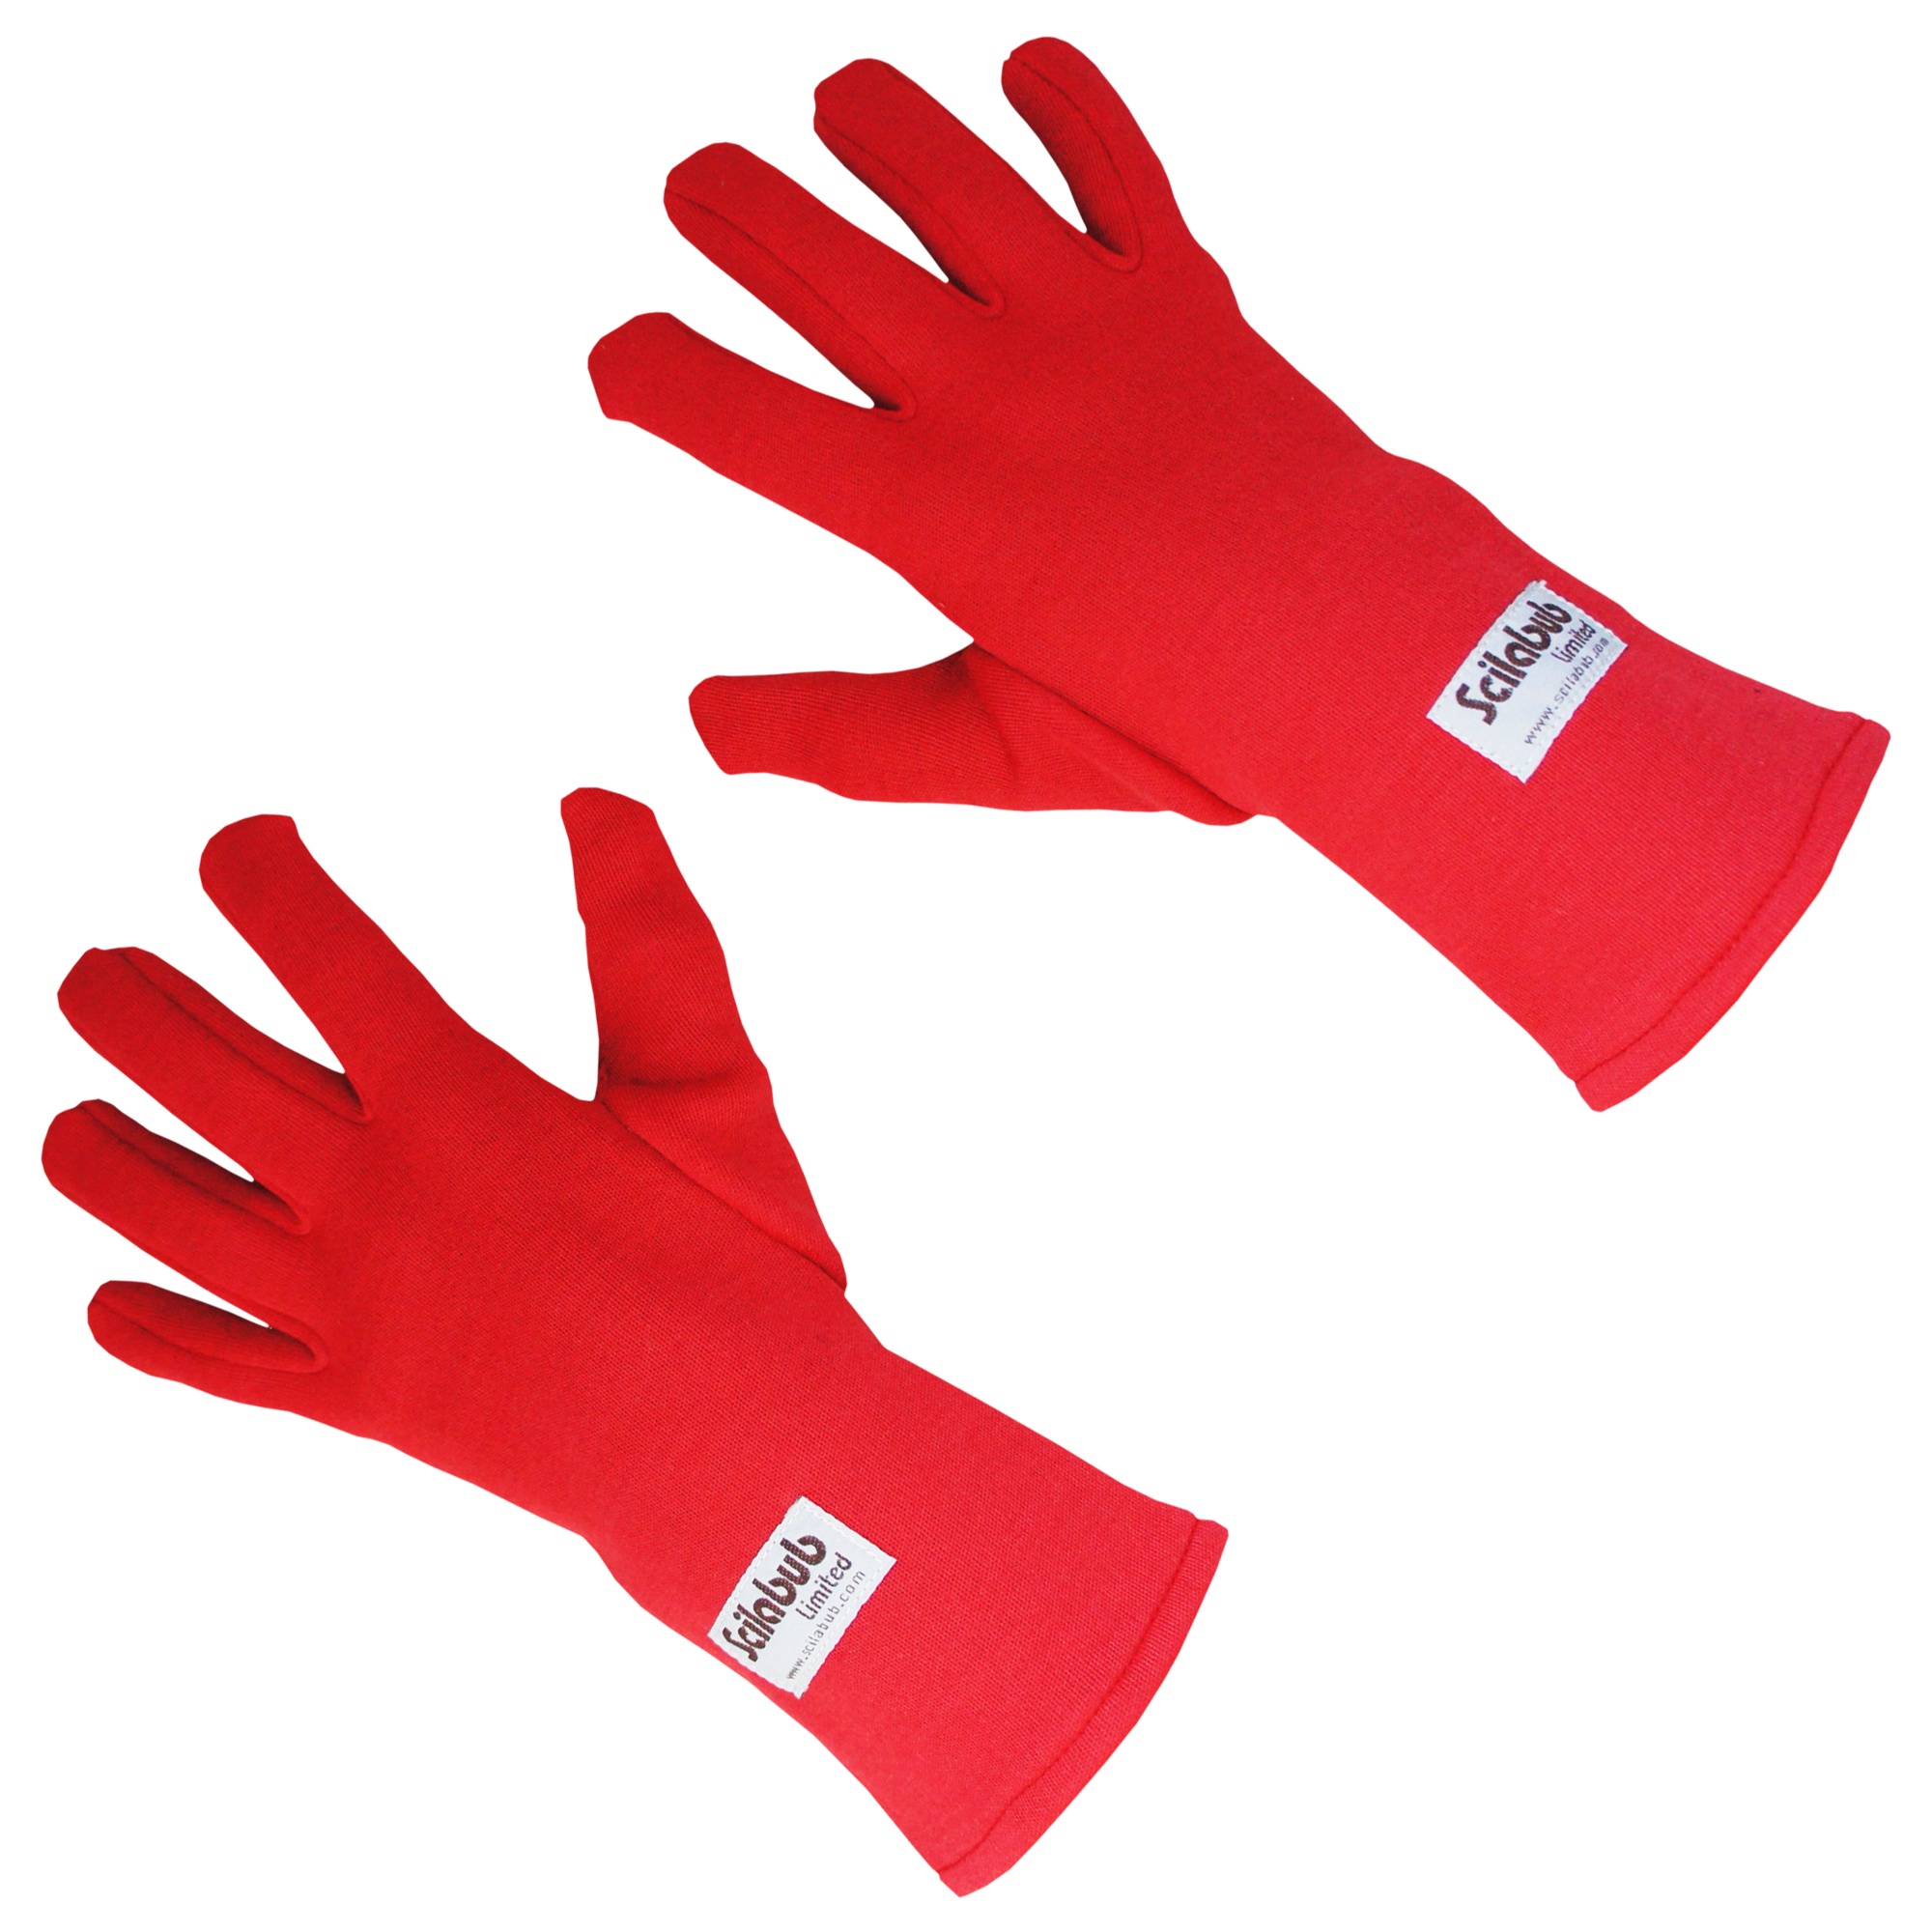 Protective gloves made of Nomex® Image